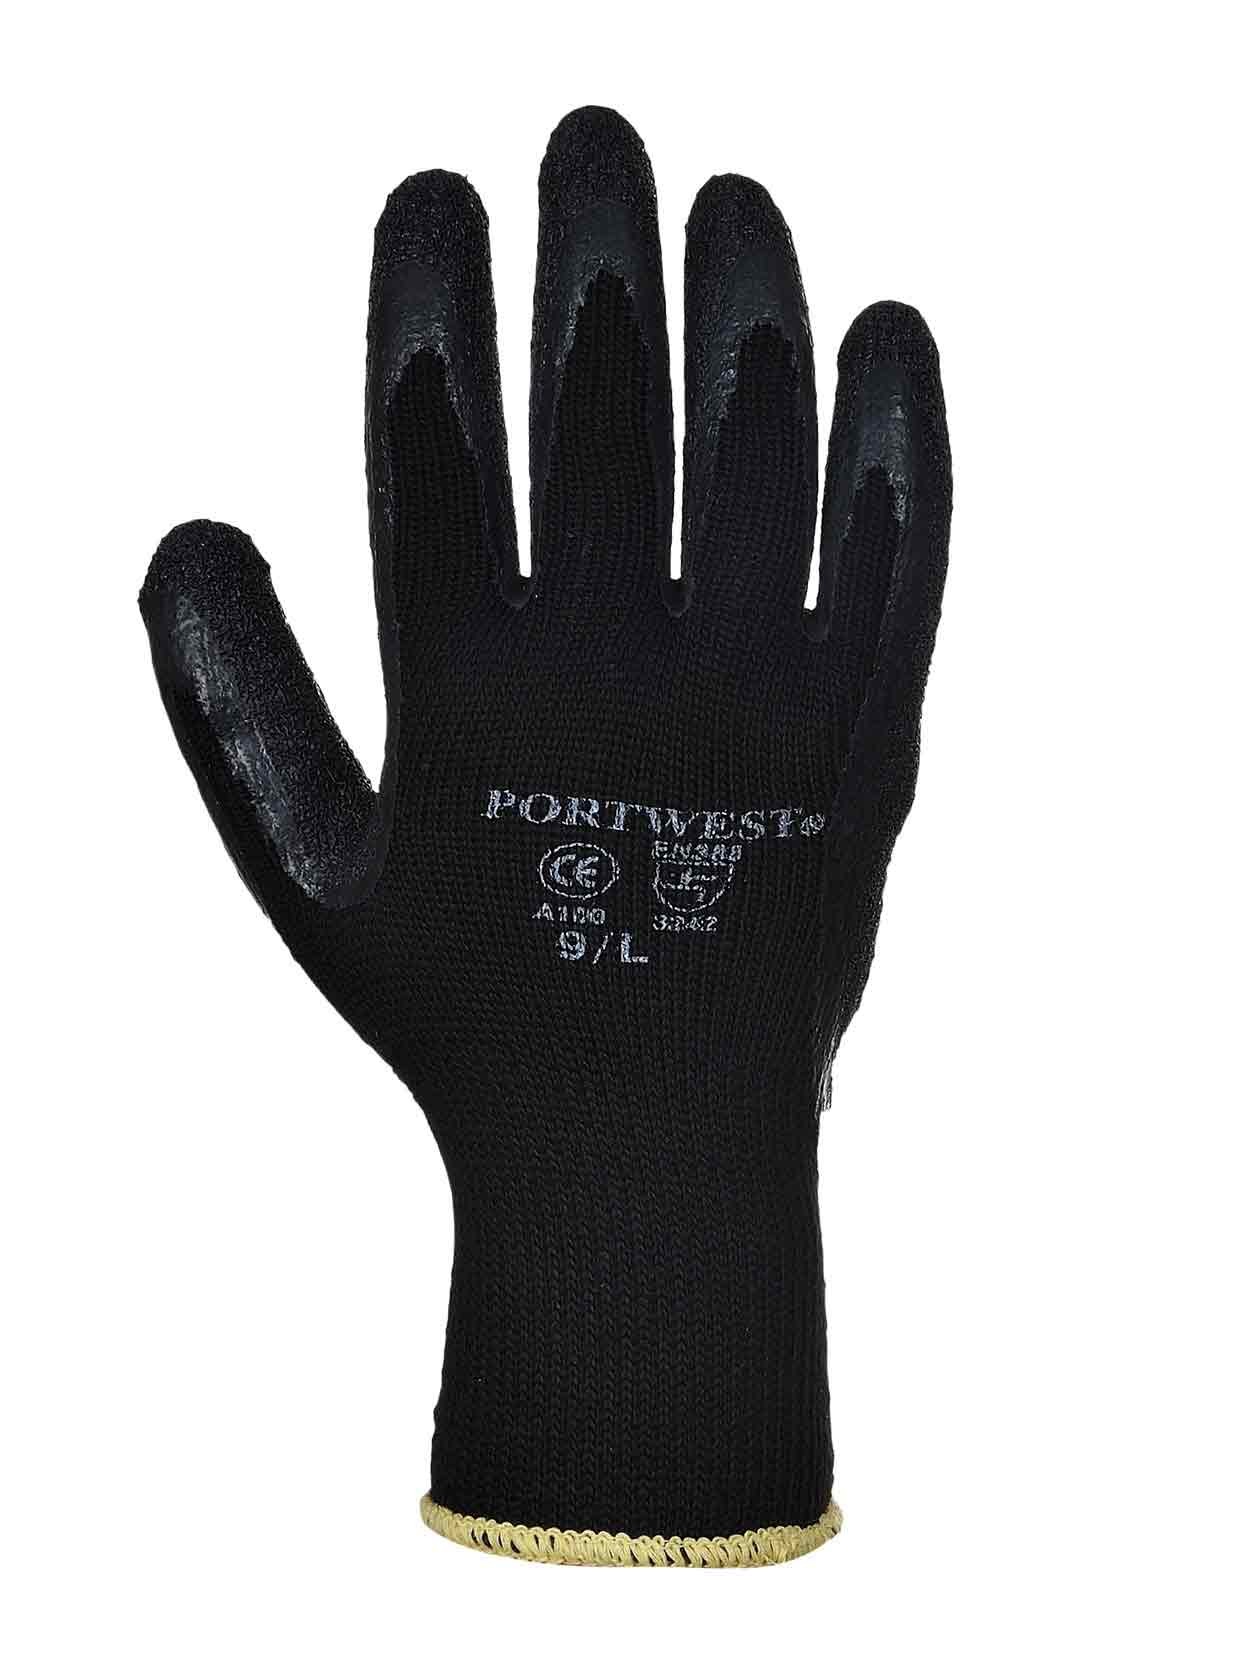 12 Pairs Portwest A100 Grip Latex Palm Safety Work Wear Gloves Various Colours